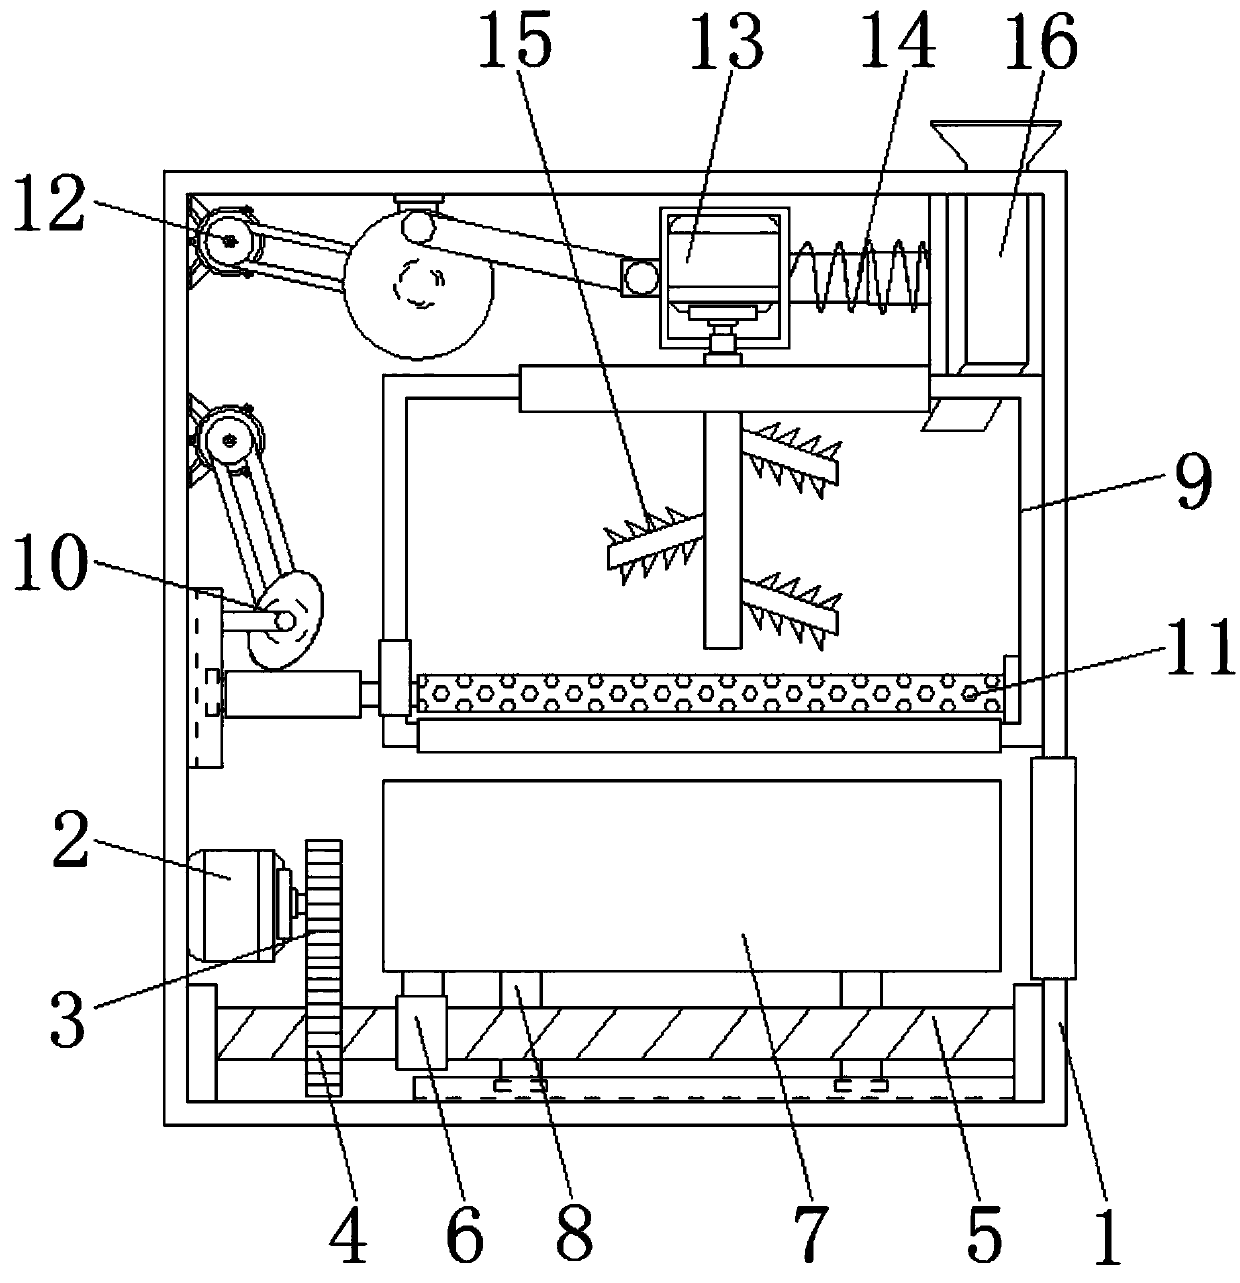 Inoculated log smashing and screening device convenient for discharging